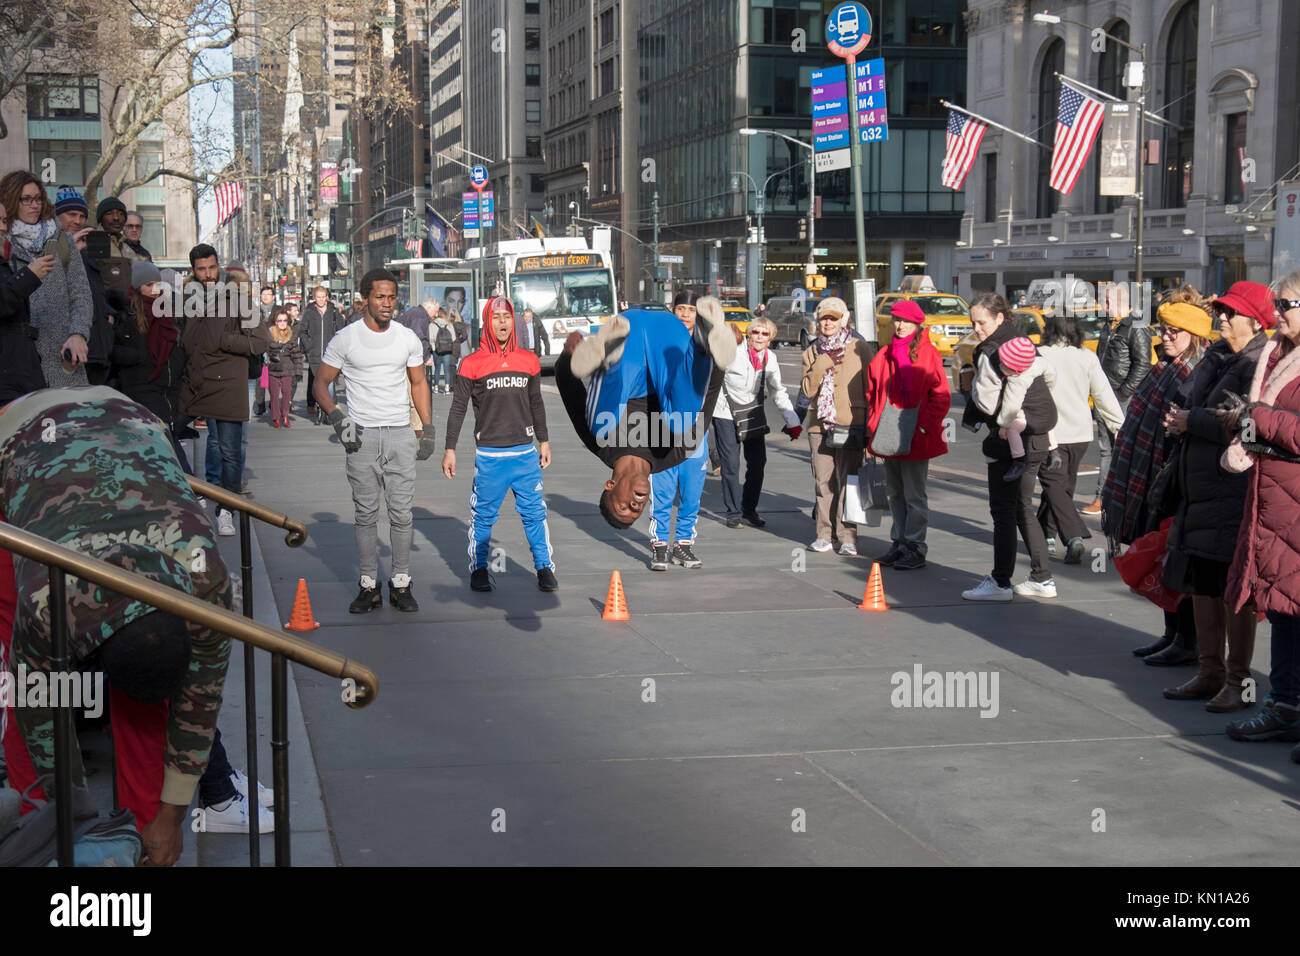 Athletic acrobatic dancers perform for donations on Fifth Avenue in Midtown Manhattan, New York City.donations, mopney Stock Photo